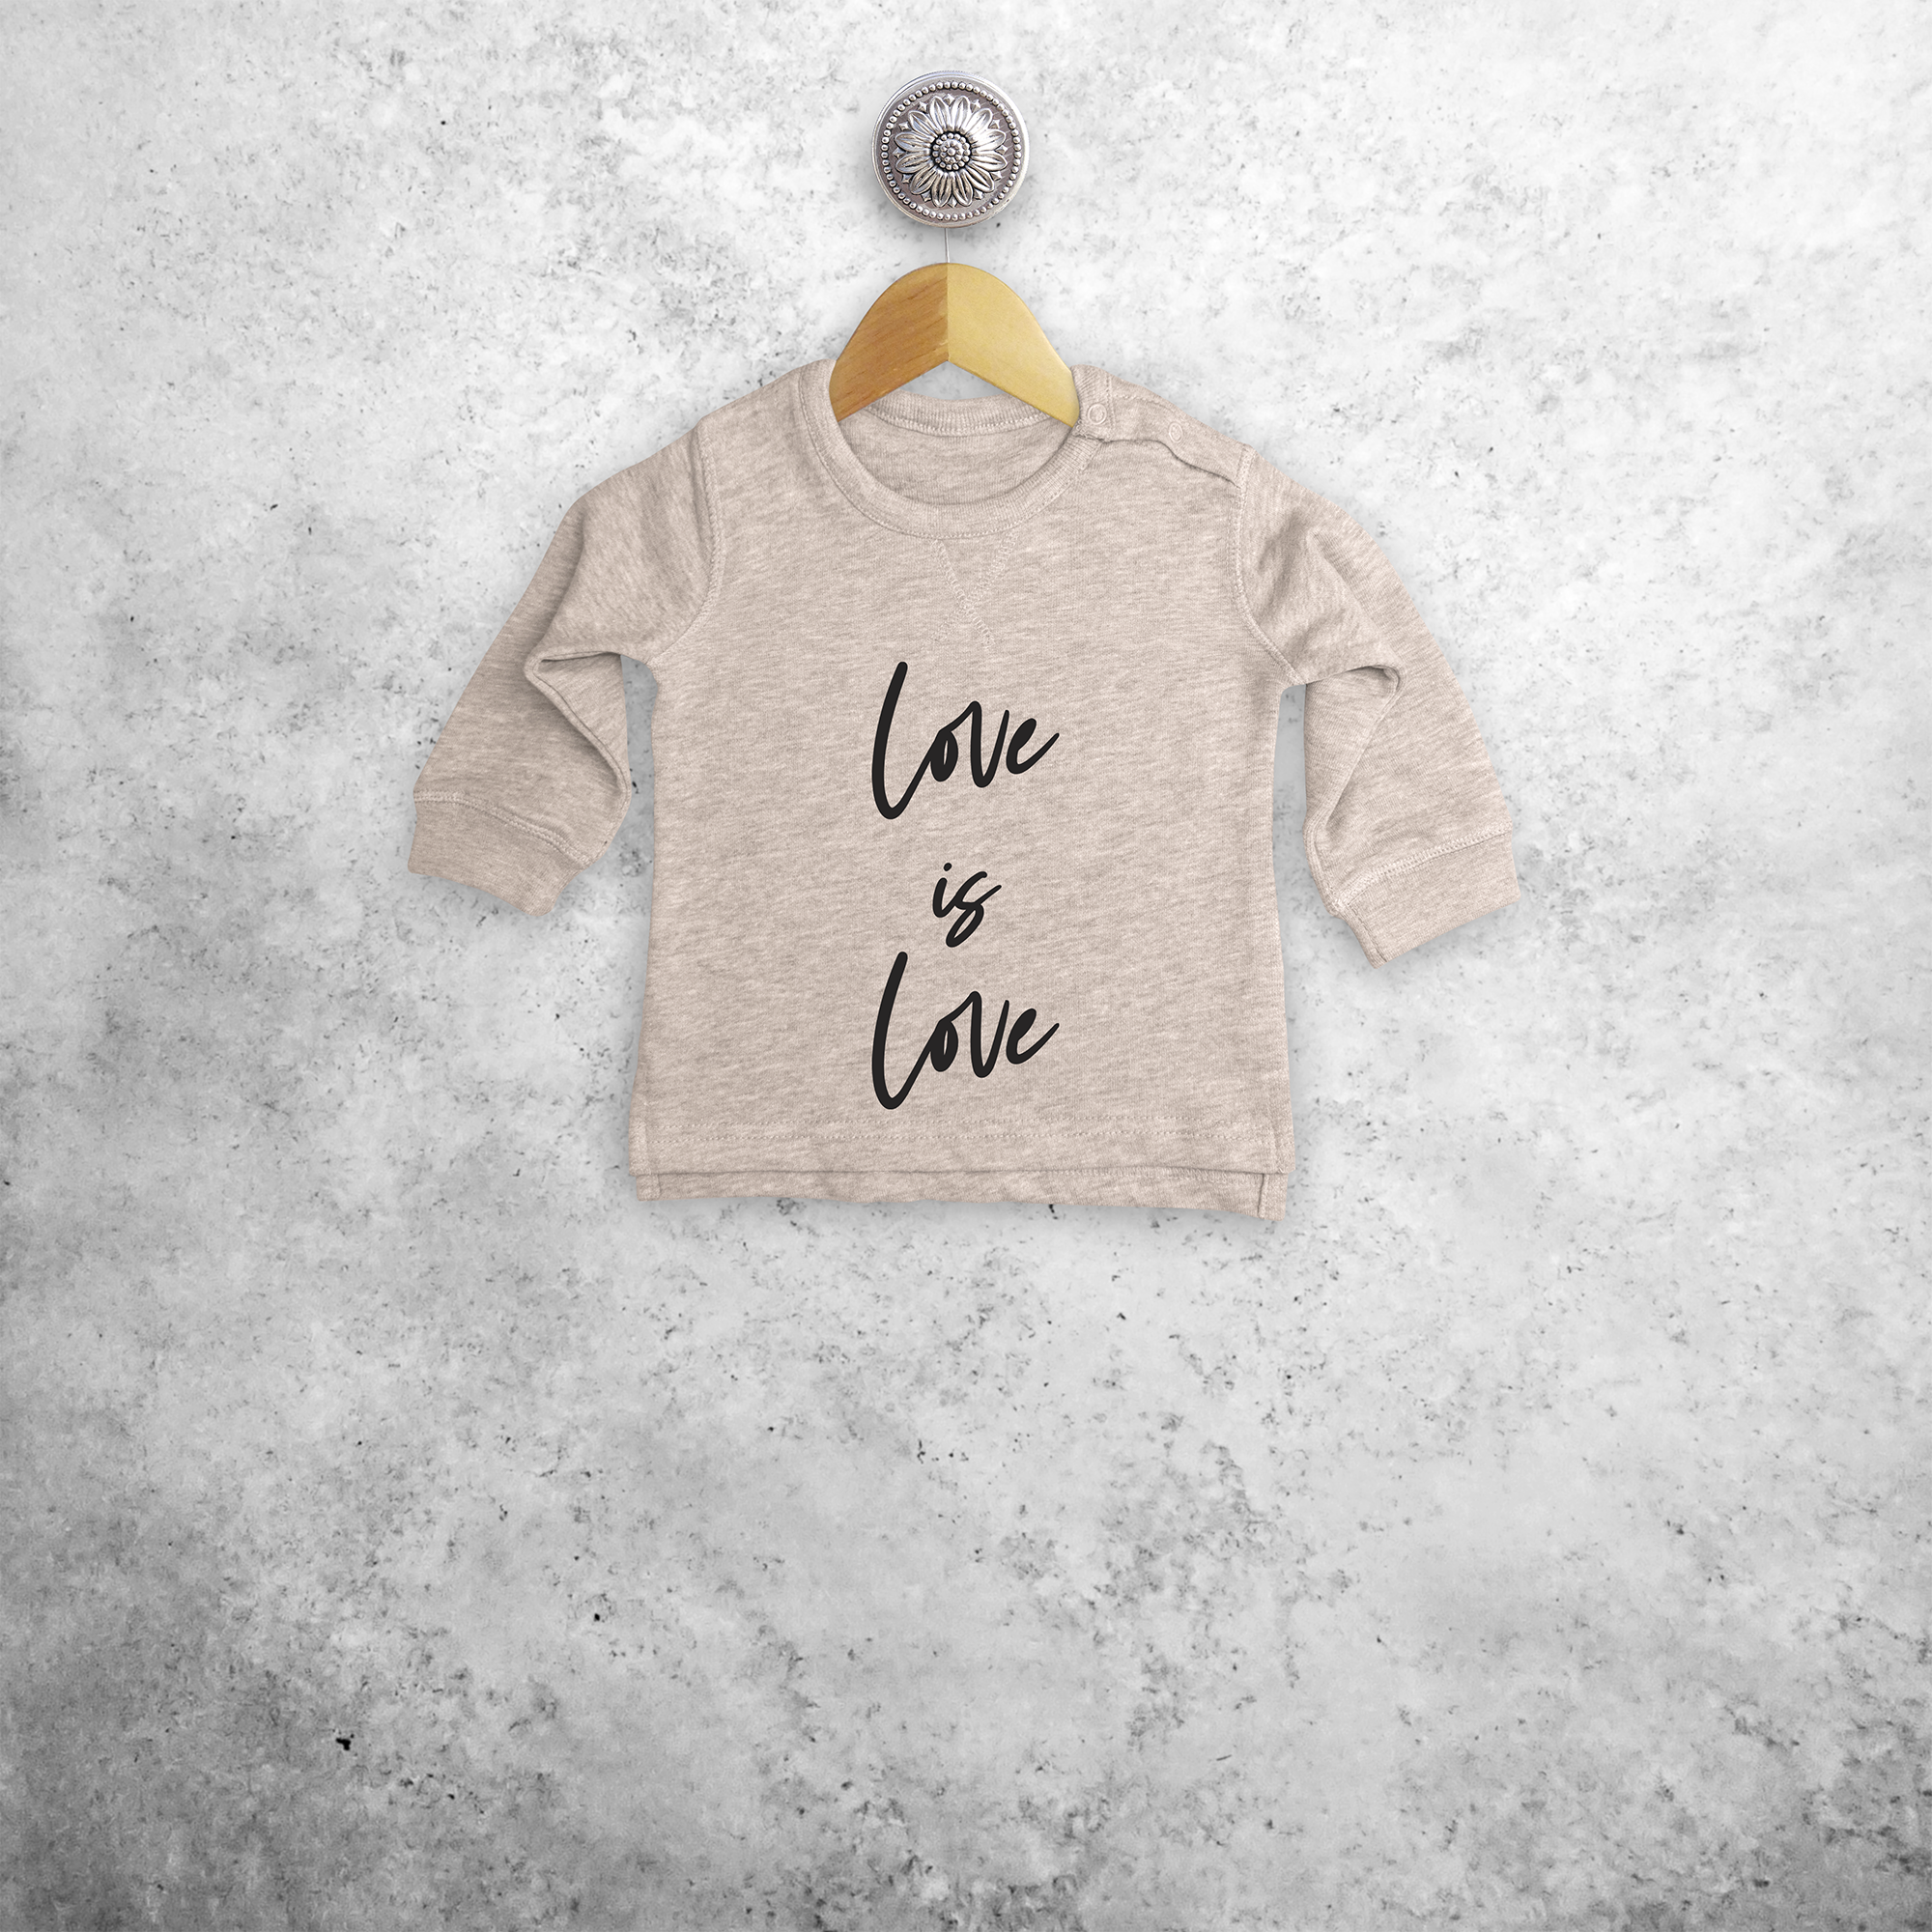 'Love is love' baby sweater